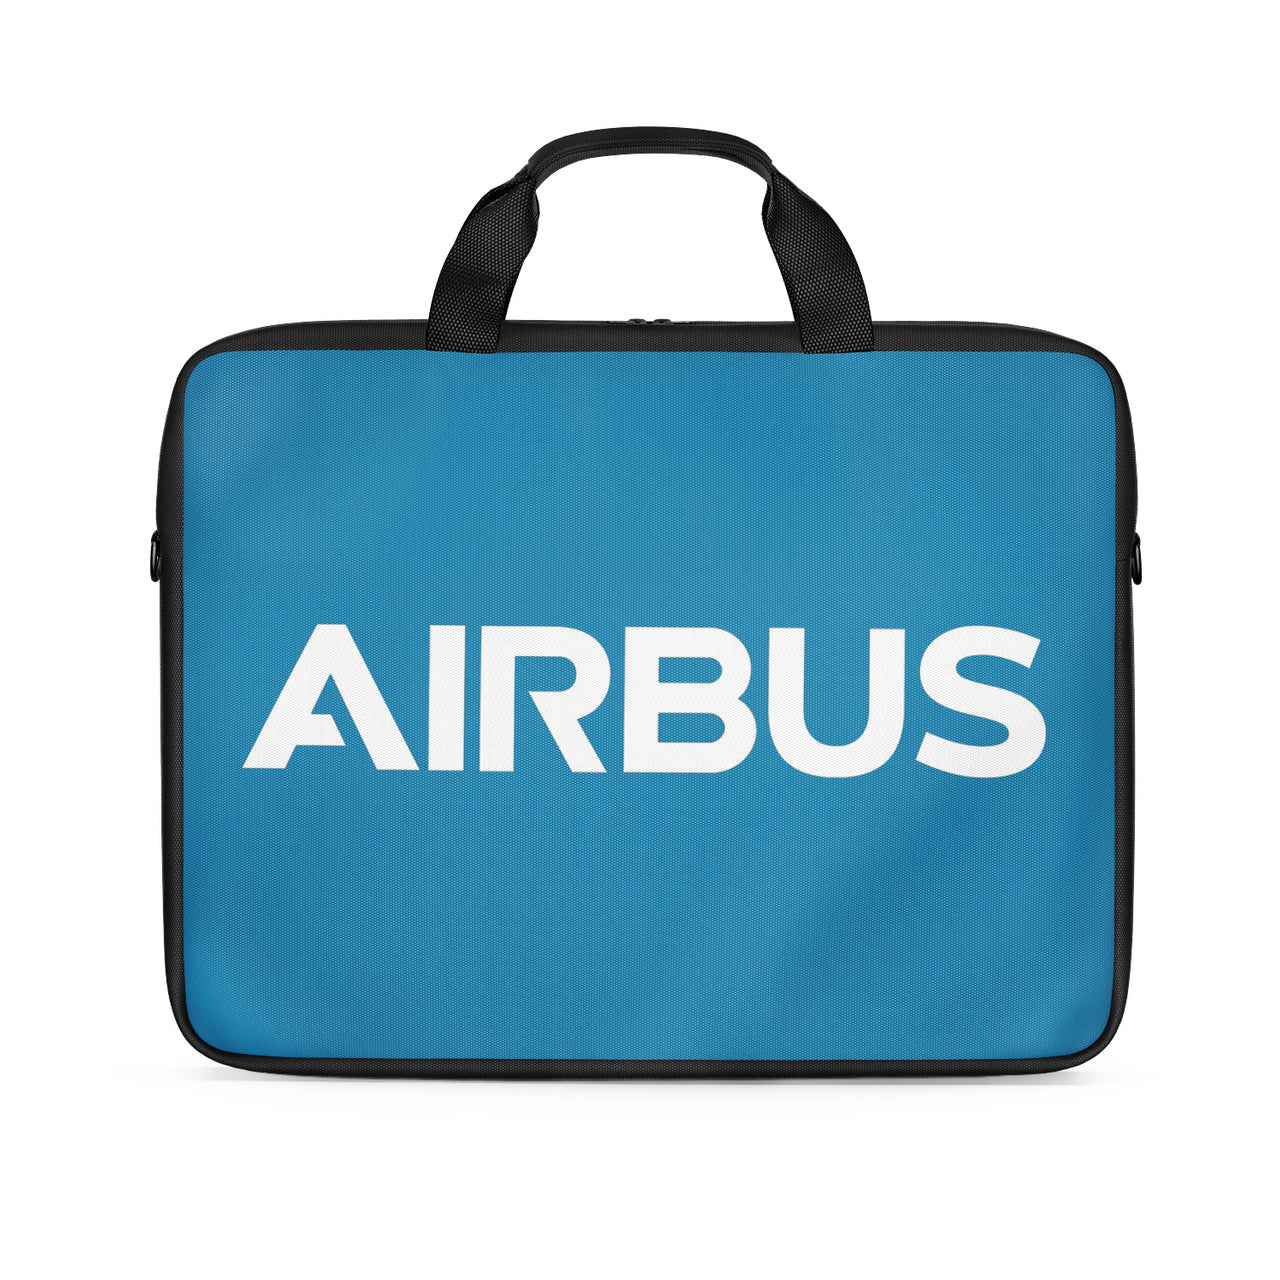 Airbus & Text Designed Laptop & Tablet Bags